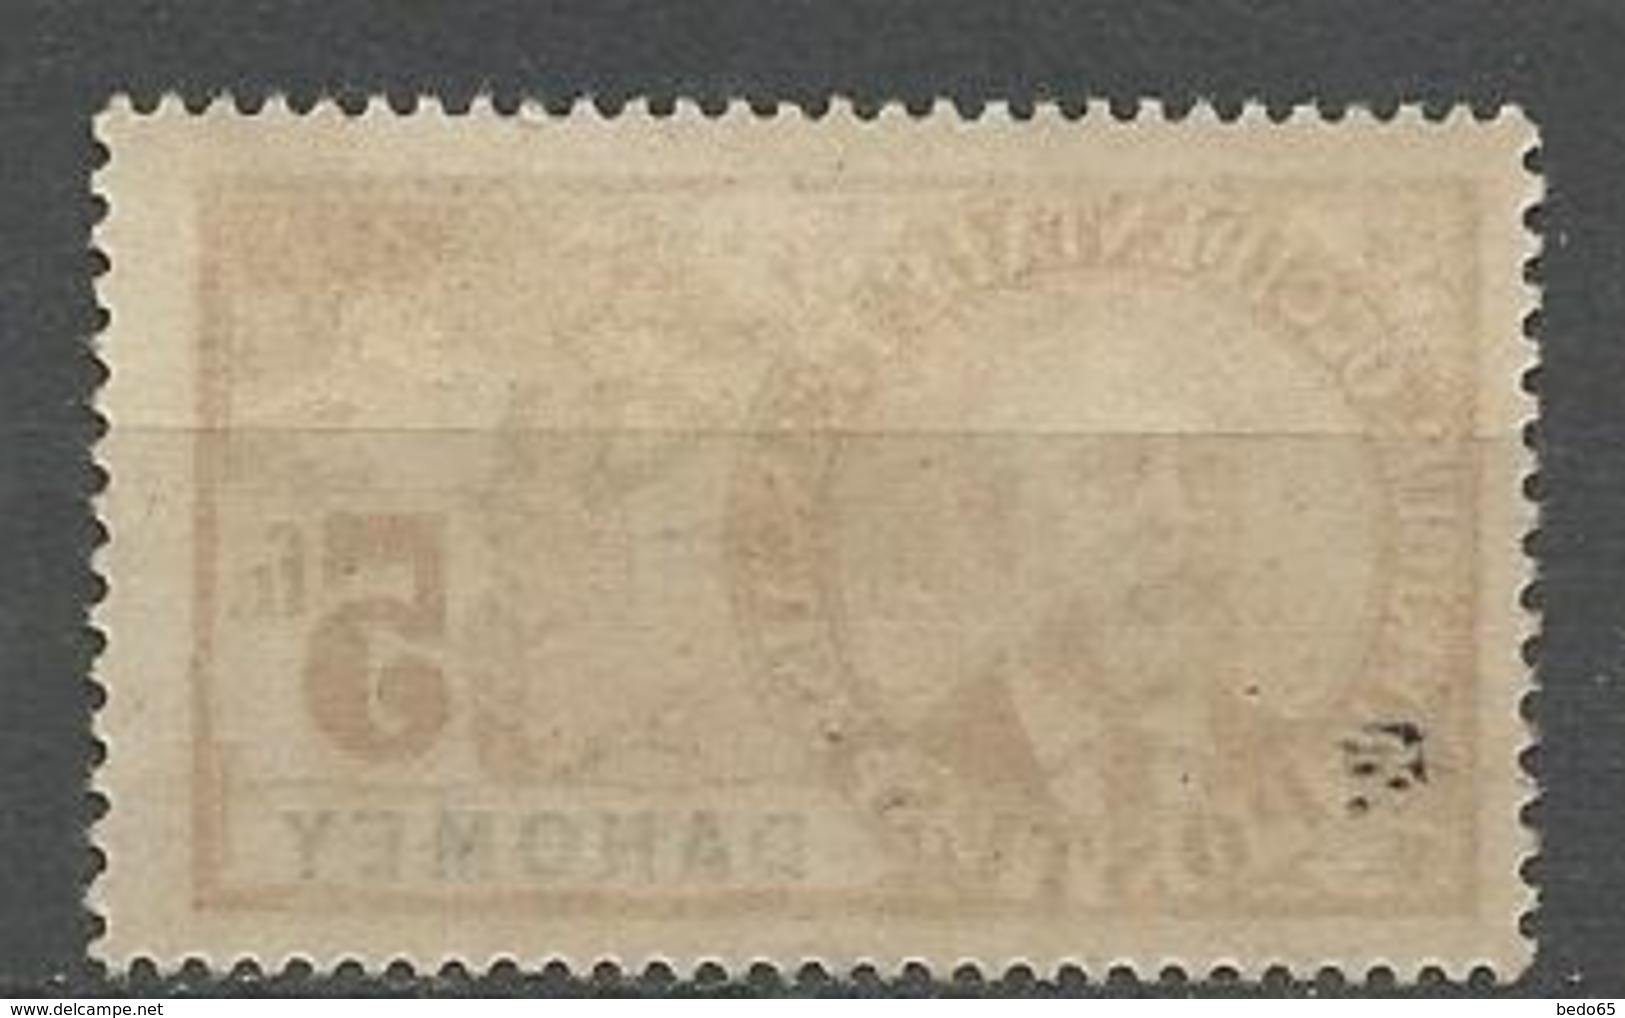 DAHOMEY N° 32 NEUF* LEGERE TRACE DE CHARNIERE / MH - Unused Stamps